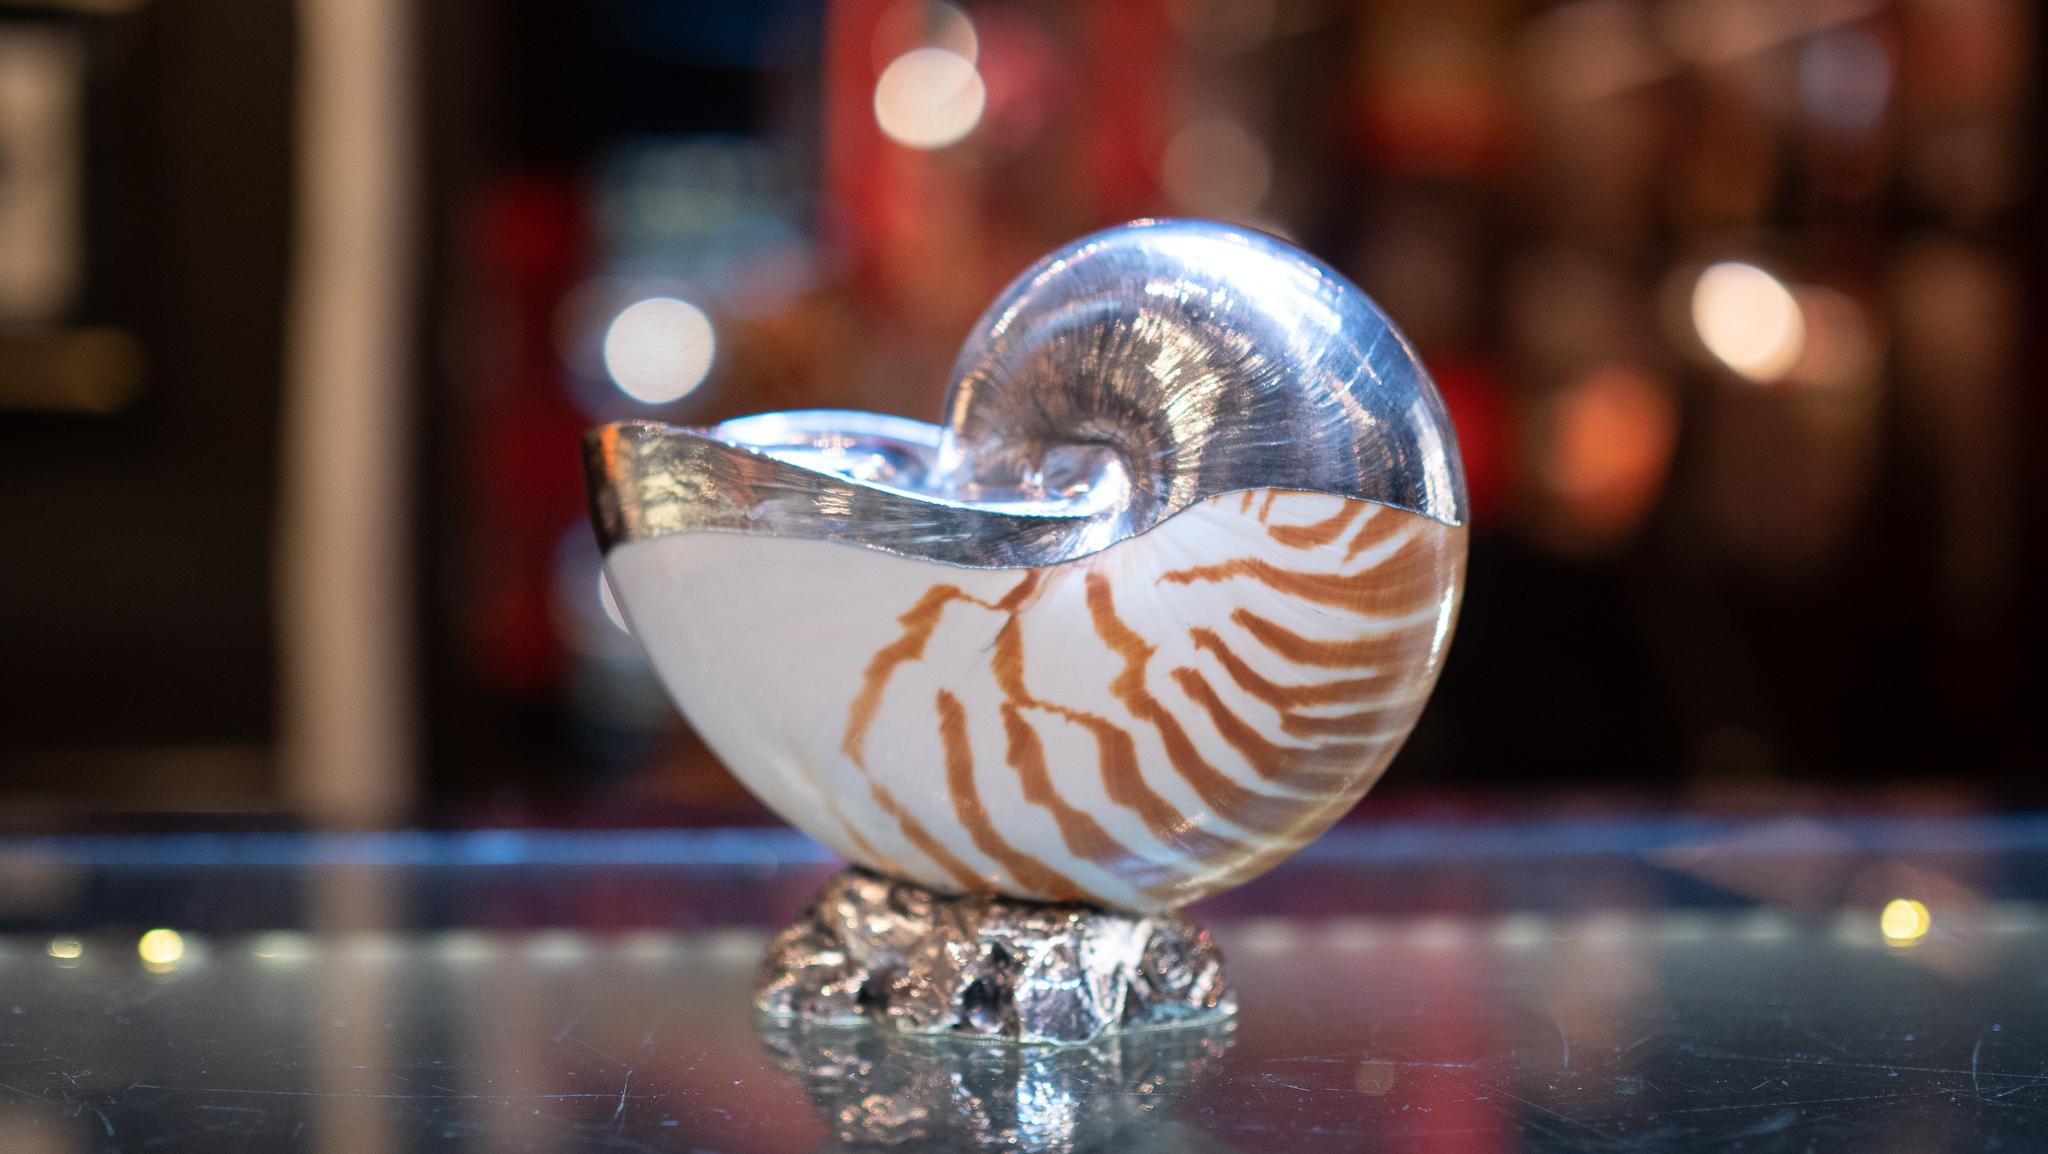 Nautilus tiger shell partially silvered candlestick holder. Creel and Gow has been working with the same atelier in Rome, Italy for over 20 years to make our signature silvered shells. Our workshop has been operated by the same family for